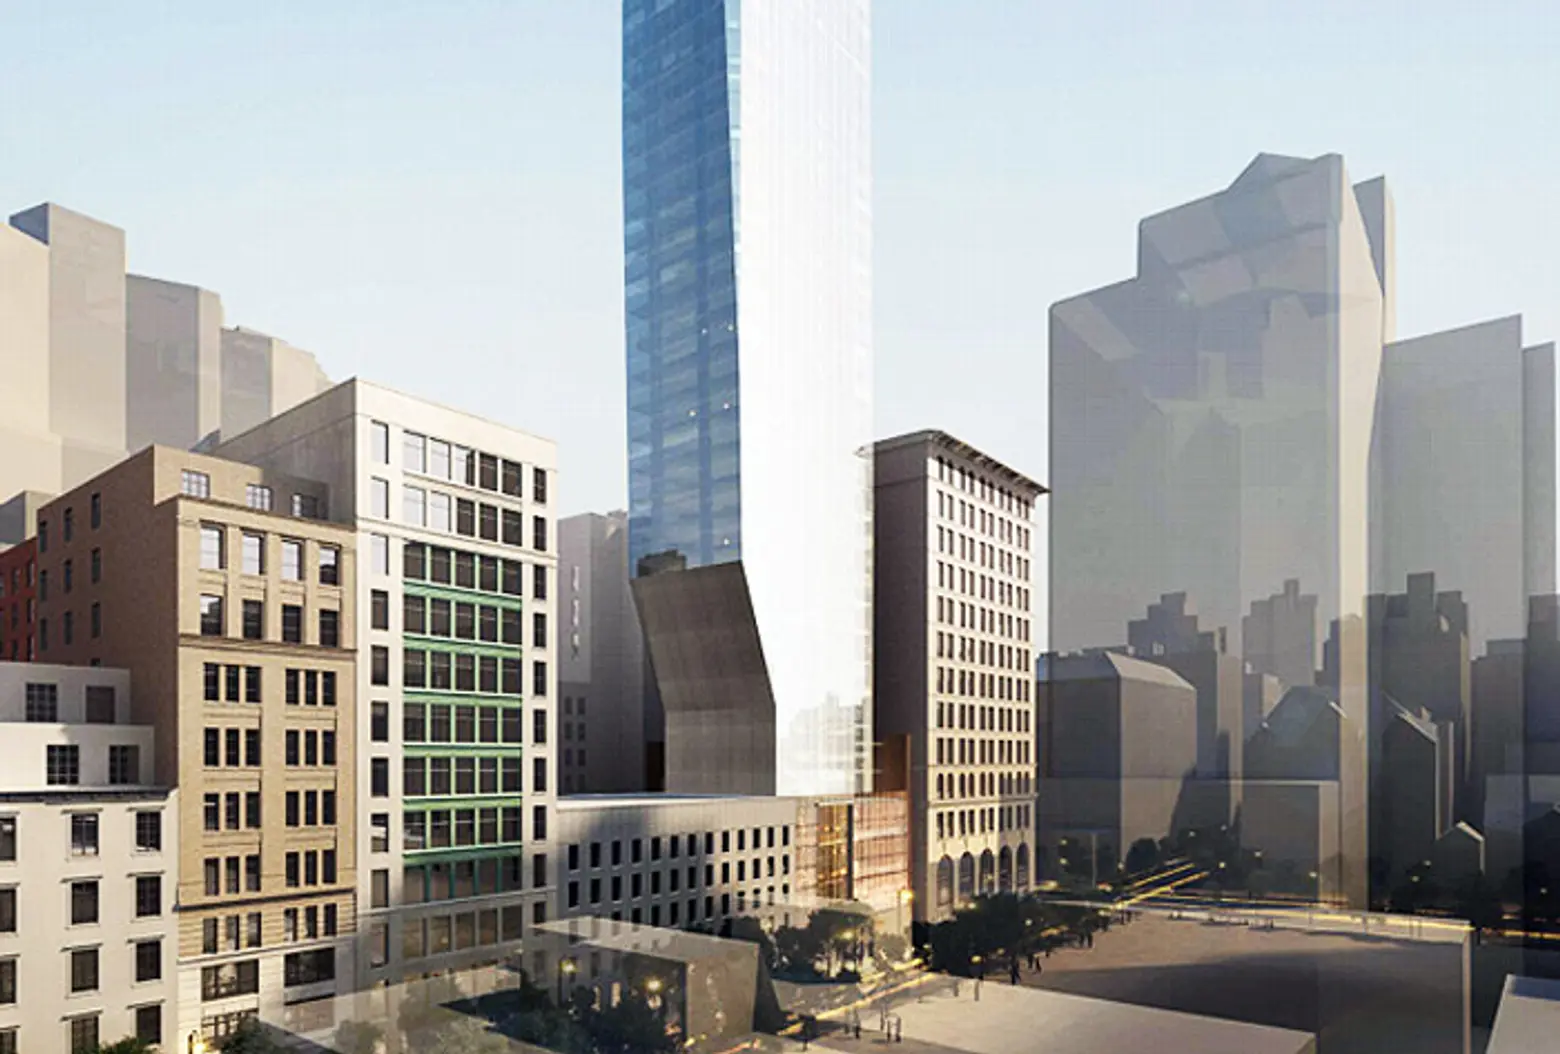 Demolition Begins at 43 East 22nd to Make Way for Bruce Eichner’s New Supertall Condo